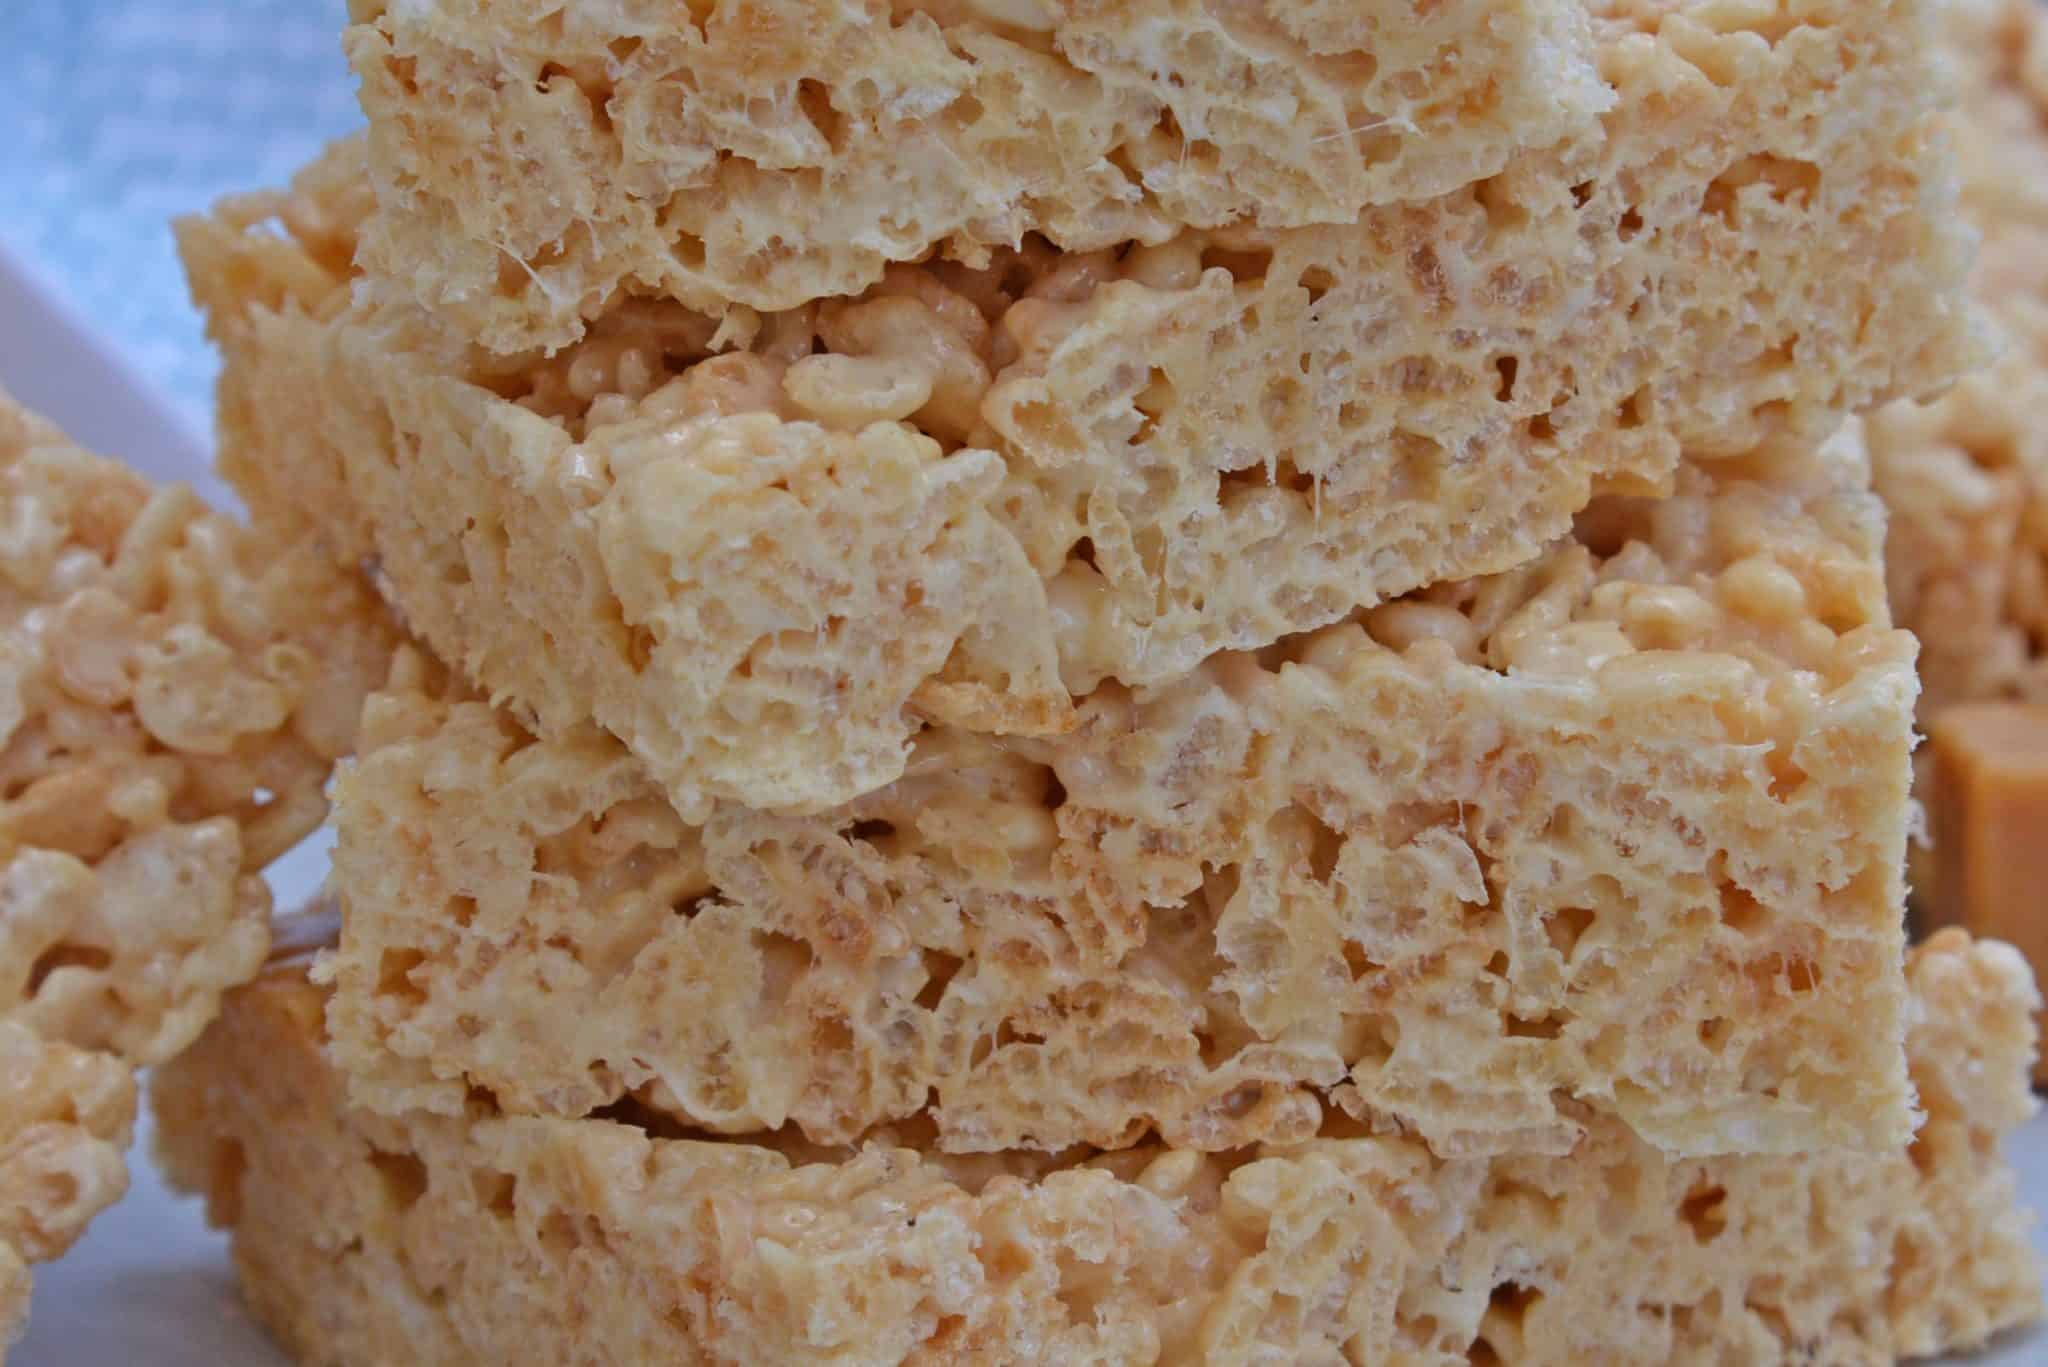 Caramel Rice Krispie Treats are a new twist on an old favorite! These homemade Rice Krispie Treats are so good and miles better then the store bought ones! #homemadericekrispietreats #carameldesserts www.savoryexperiments.com